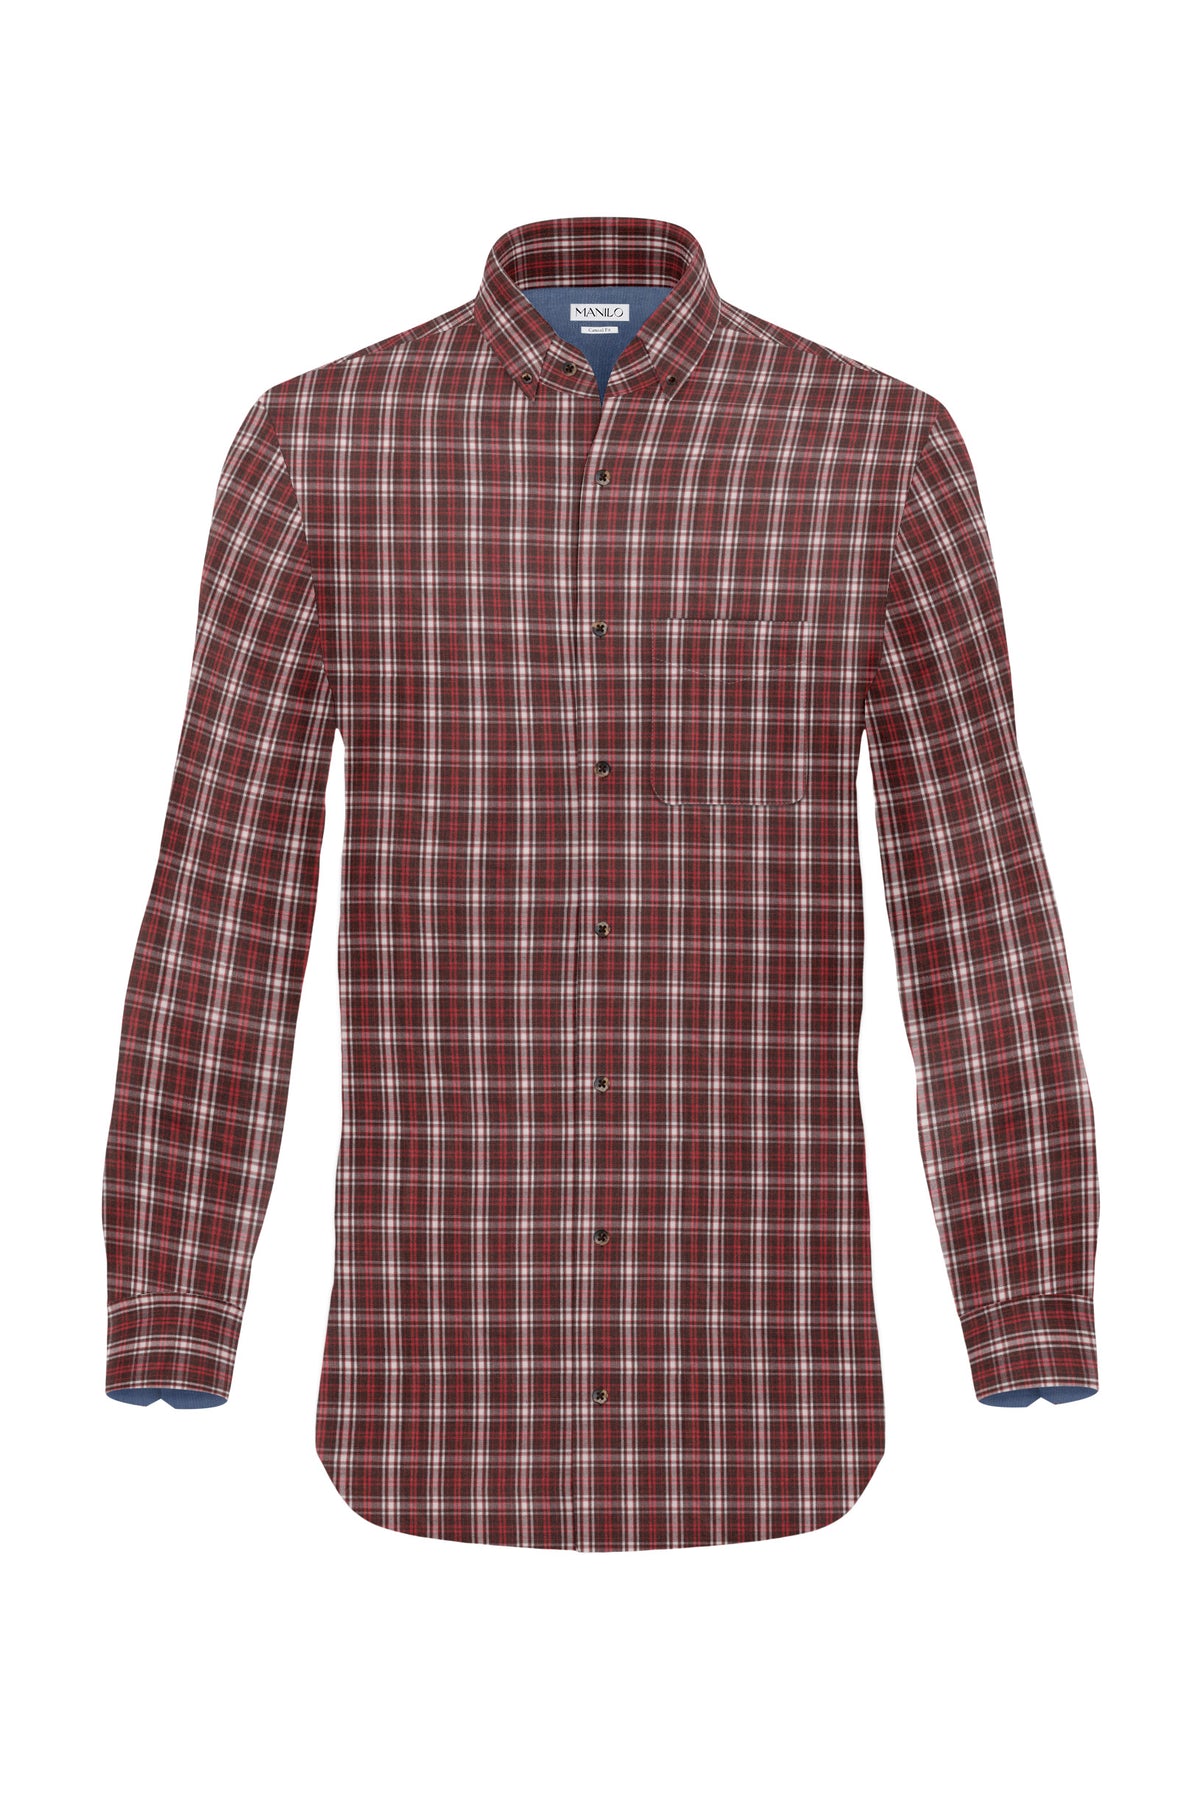 Casual shirt with check pattern in orange/brown (Art. 2124-C)